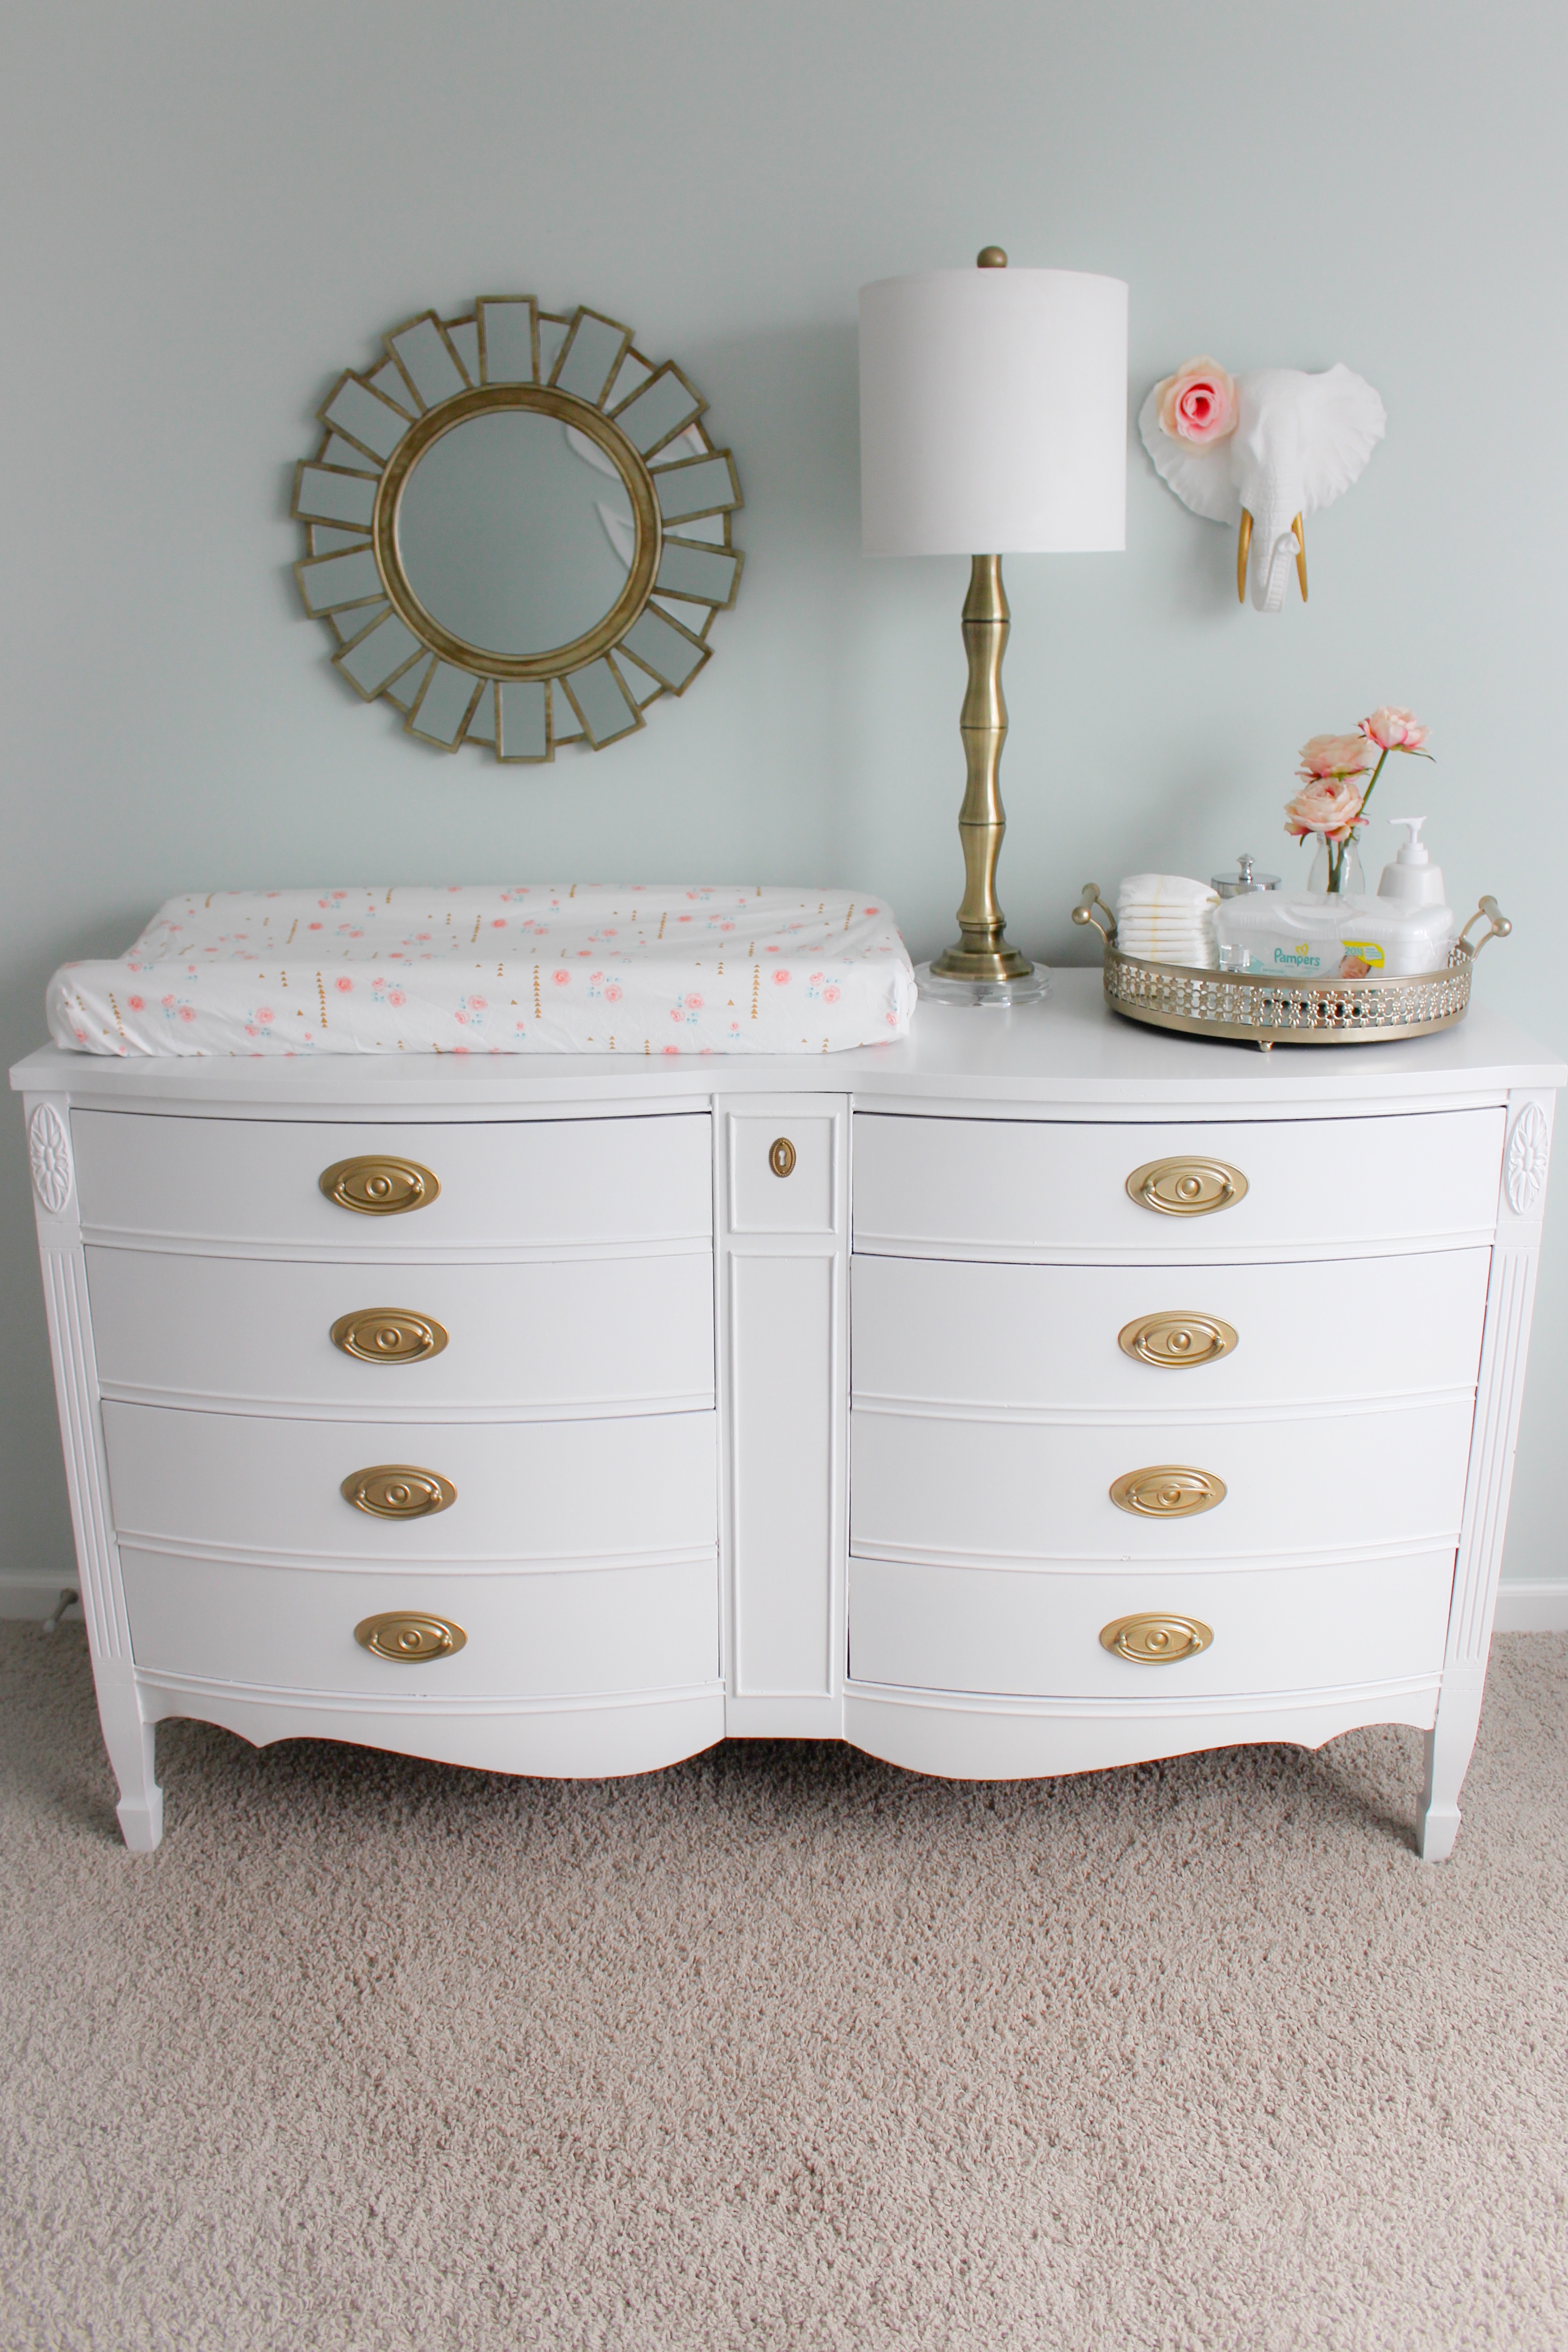 Refinished Dresser Painted White with Gold Hardware